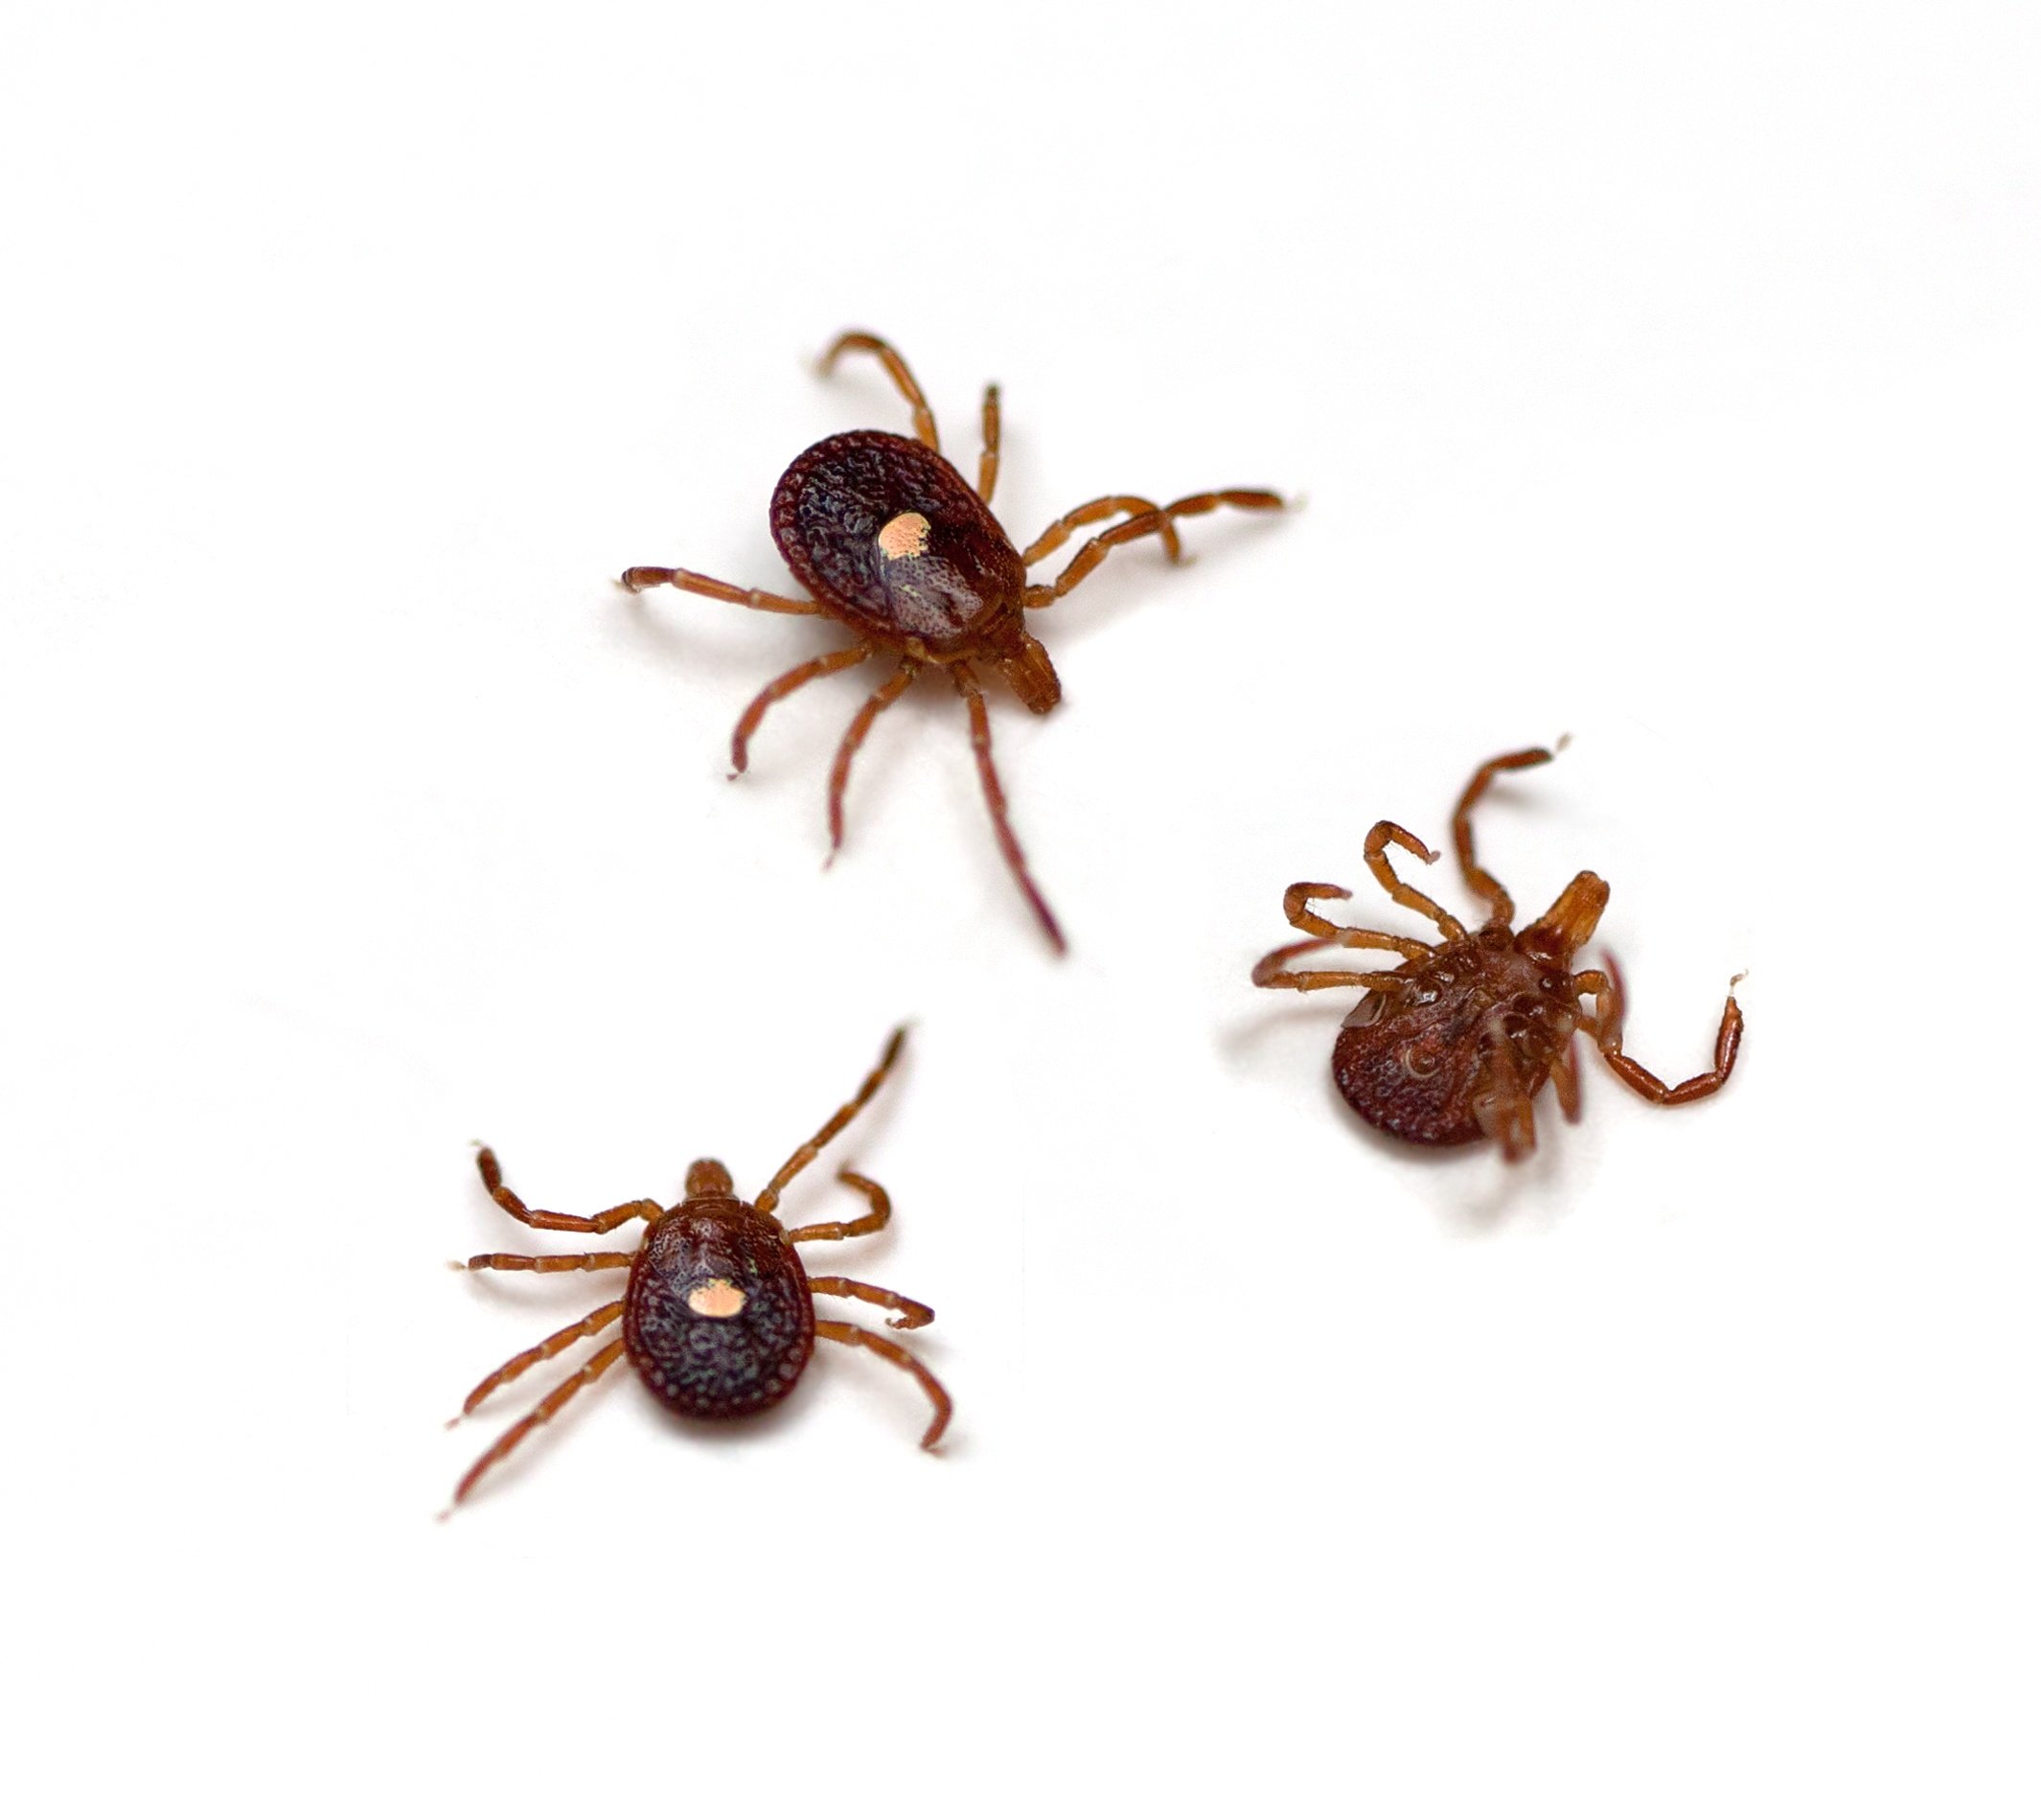 Lone Star Ticks are on the Rise